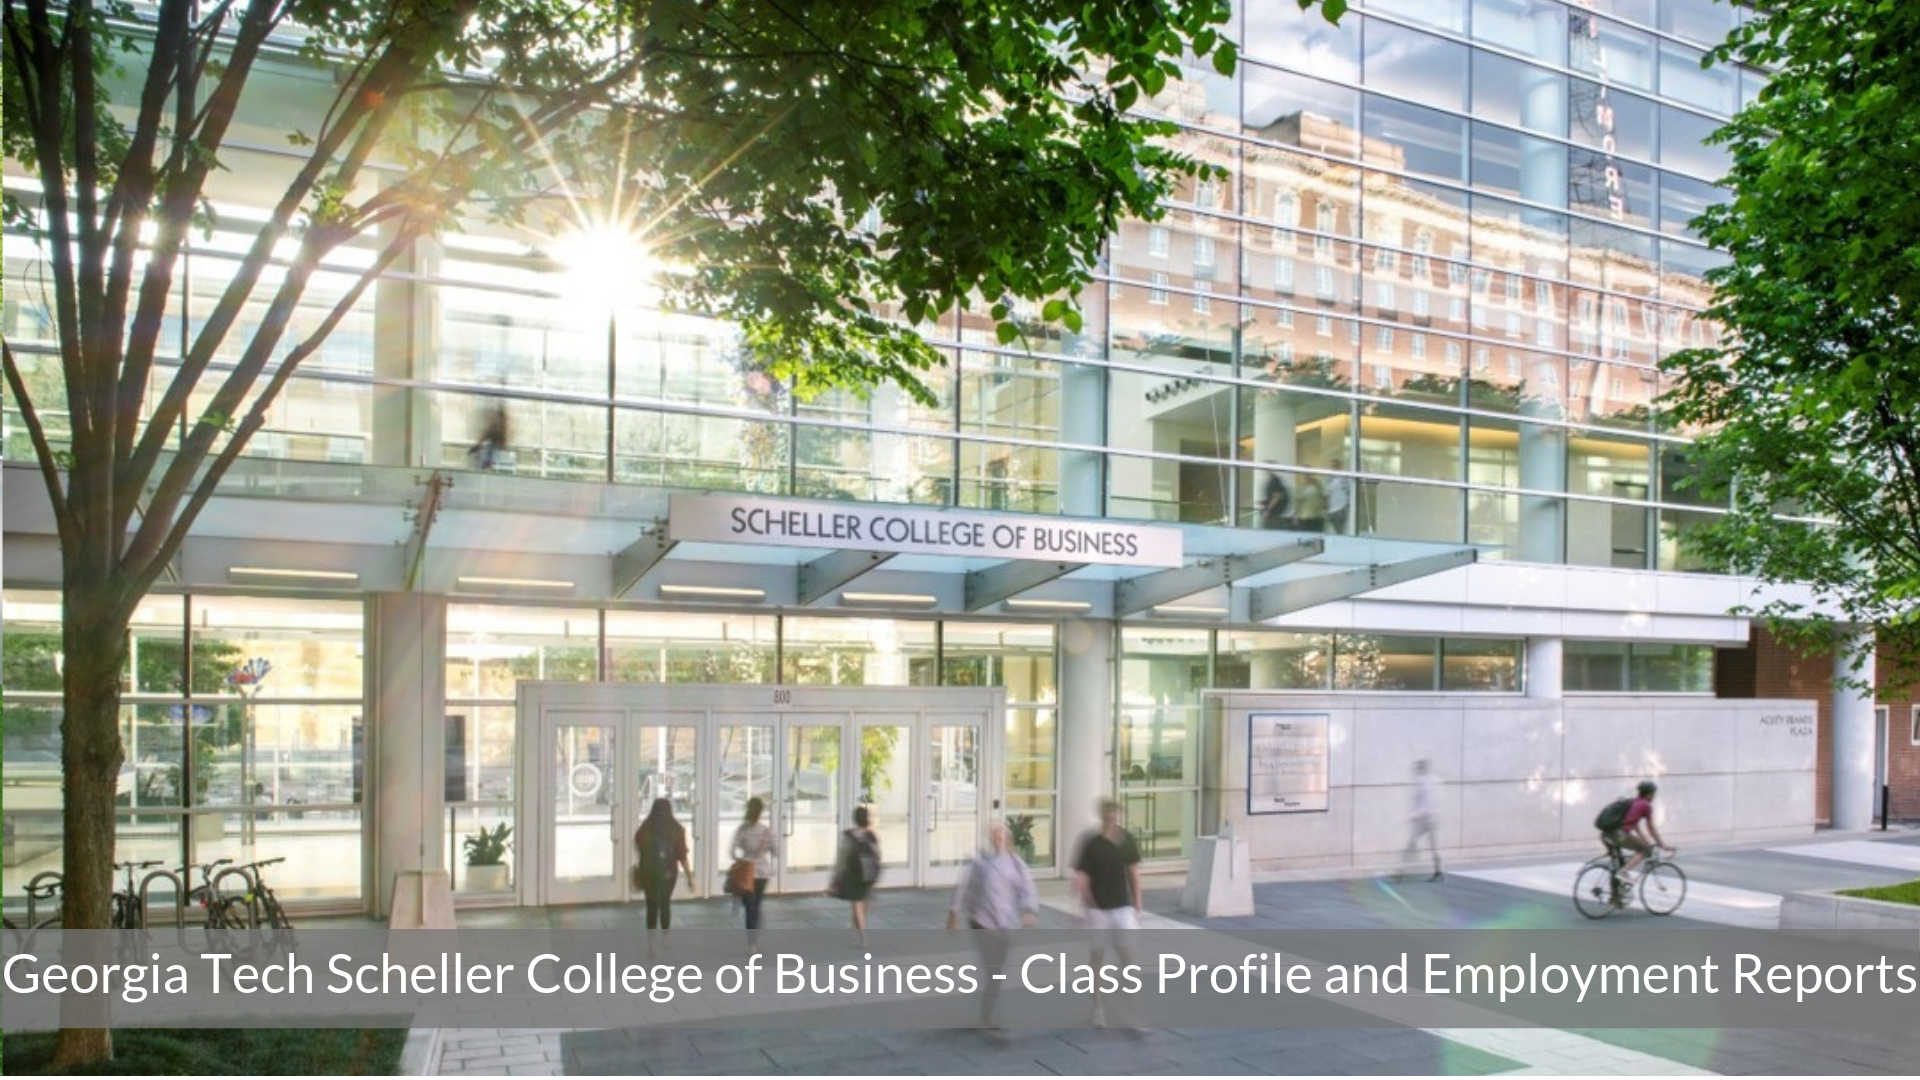 Georgia Tech MBA Program - Scheller College of Business - Class Profile, Employment Reports and Notable Alumni